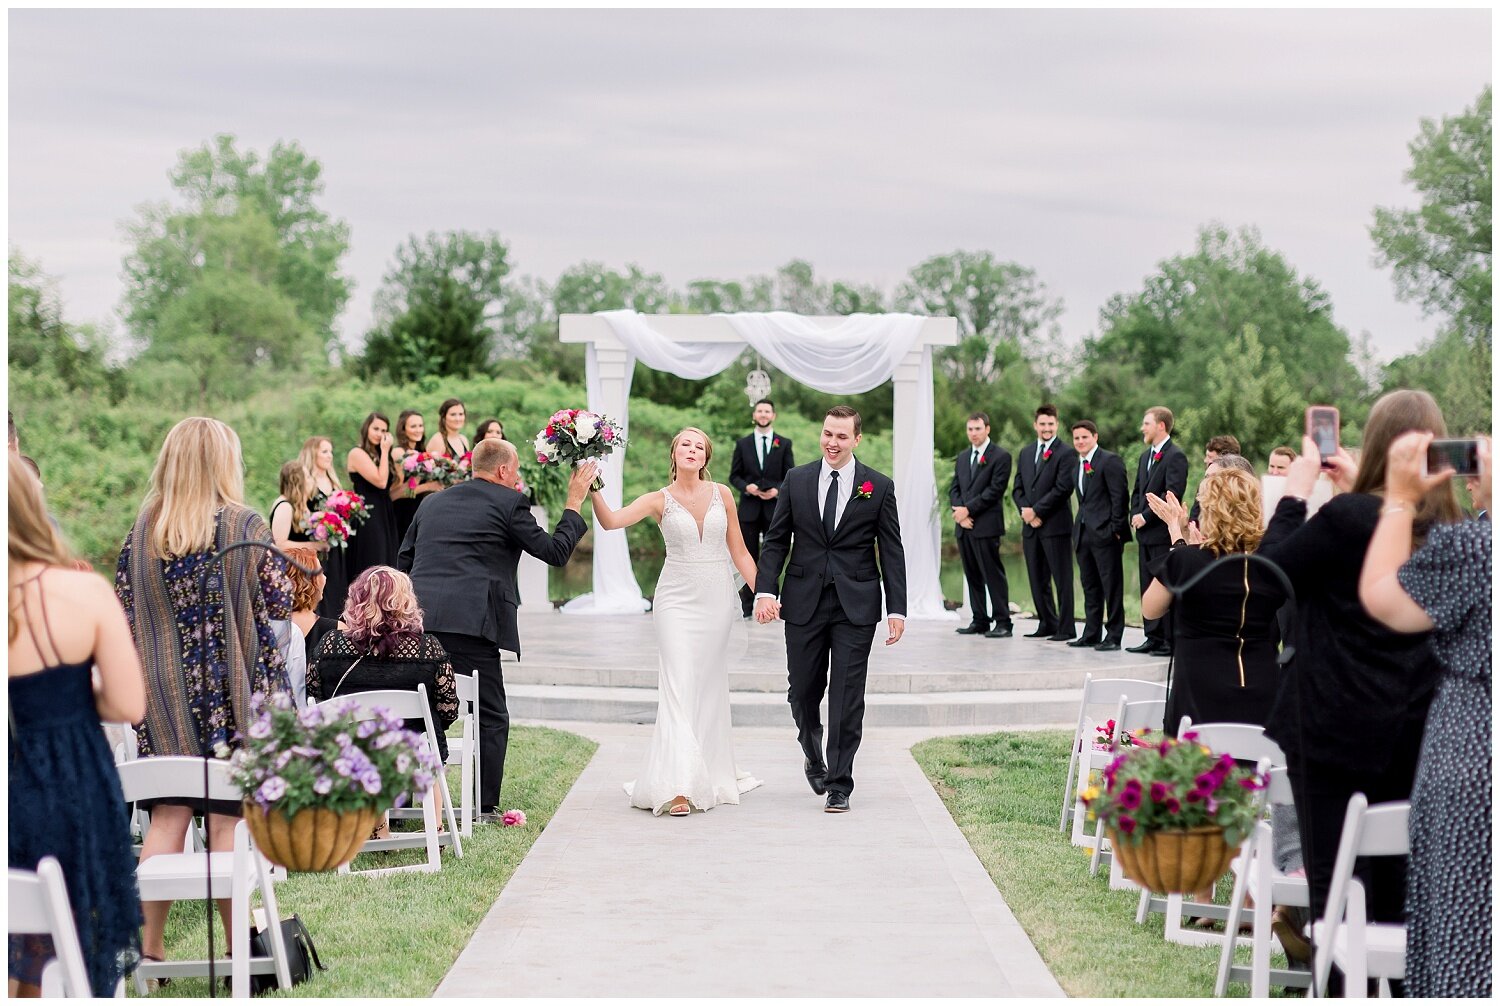 Sycamore-Tree-Wedding-Photography-Midwest-Photographer-G+C-05.2020-Elizabeth-Ladean-Photography-photo-_3379.jpg